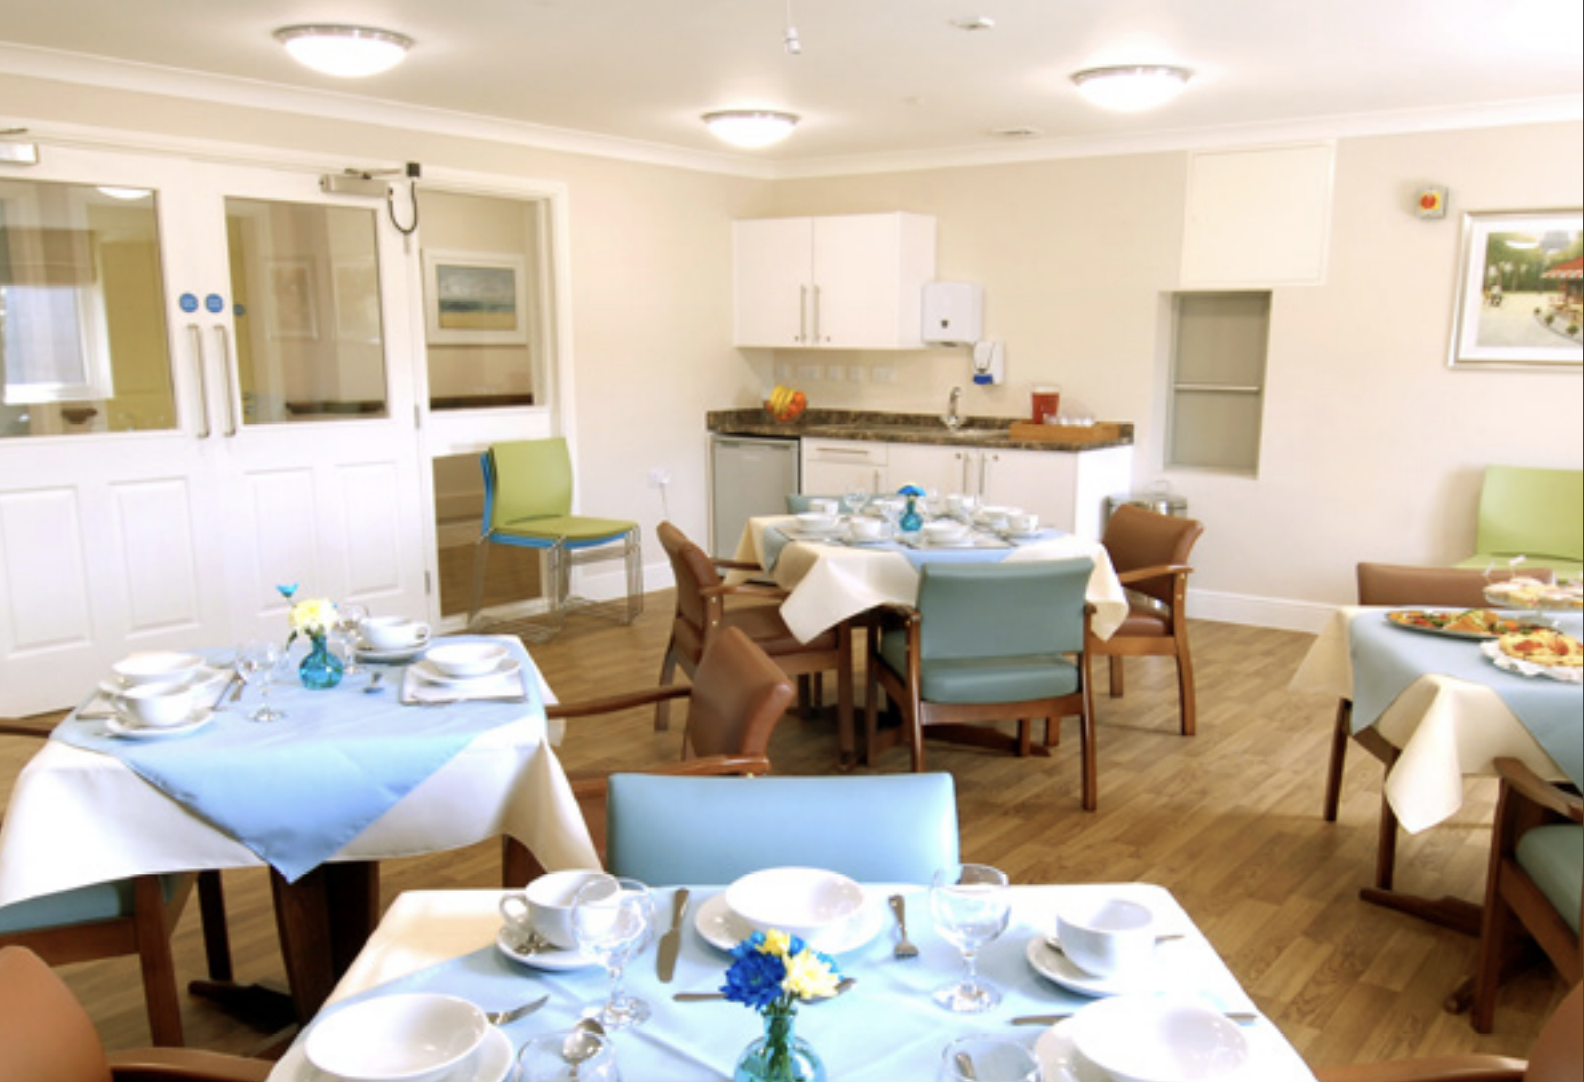 The dining area at Westhaven Care Home in Wirral, Merseyside